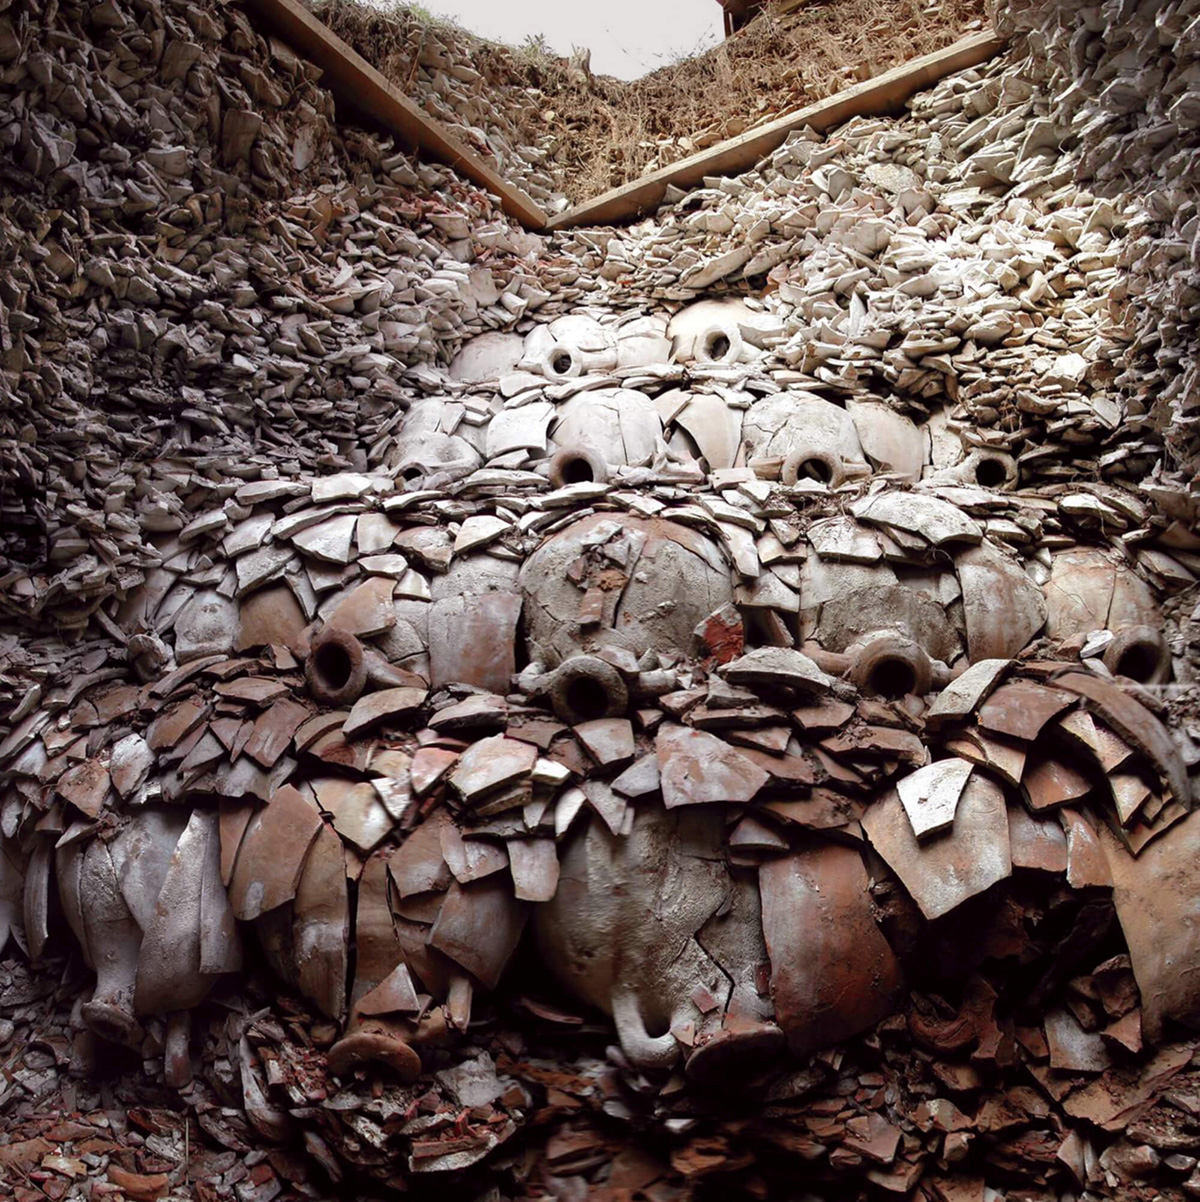 A photograph of broken olive oil amphorae at Rome’s Monte Testaccio, known as “The Hill of Shards.”